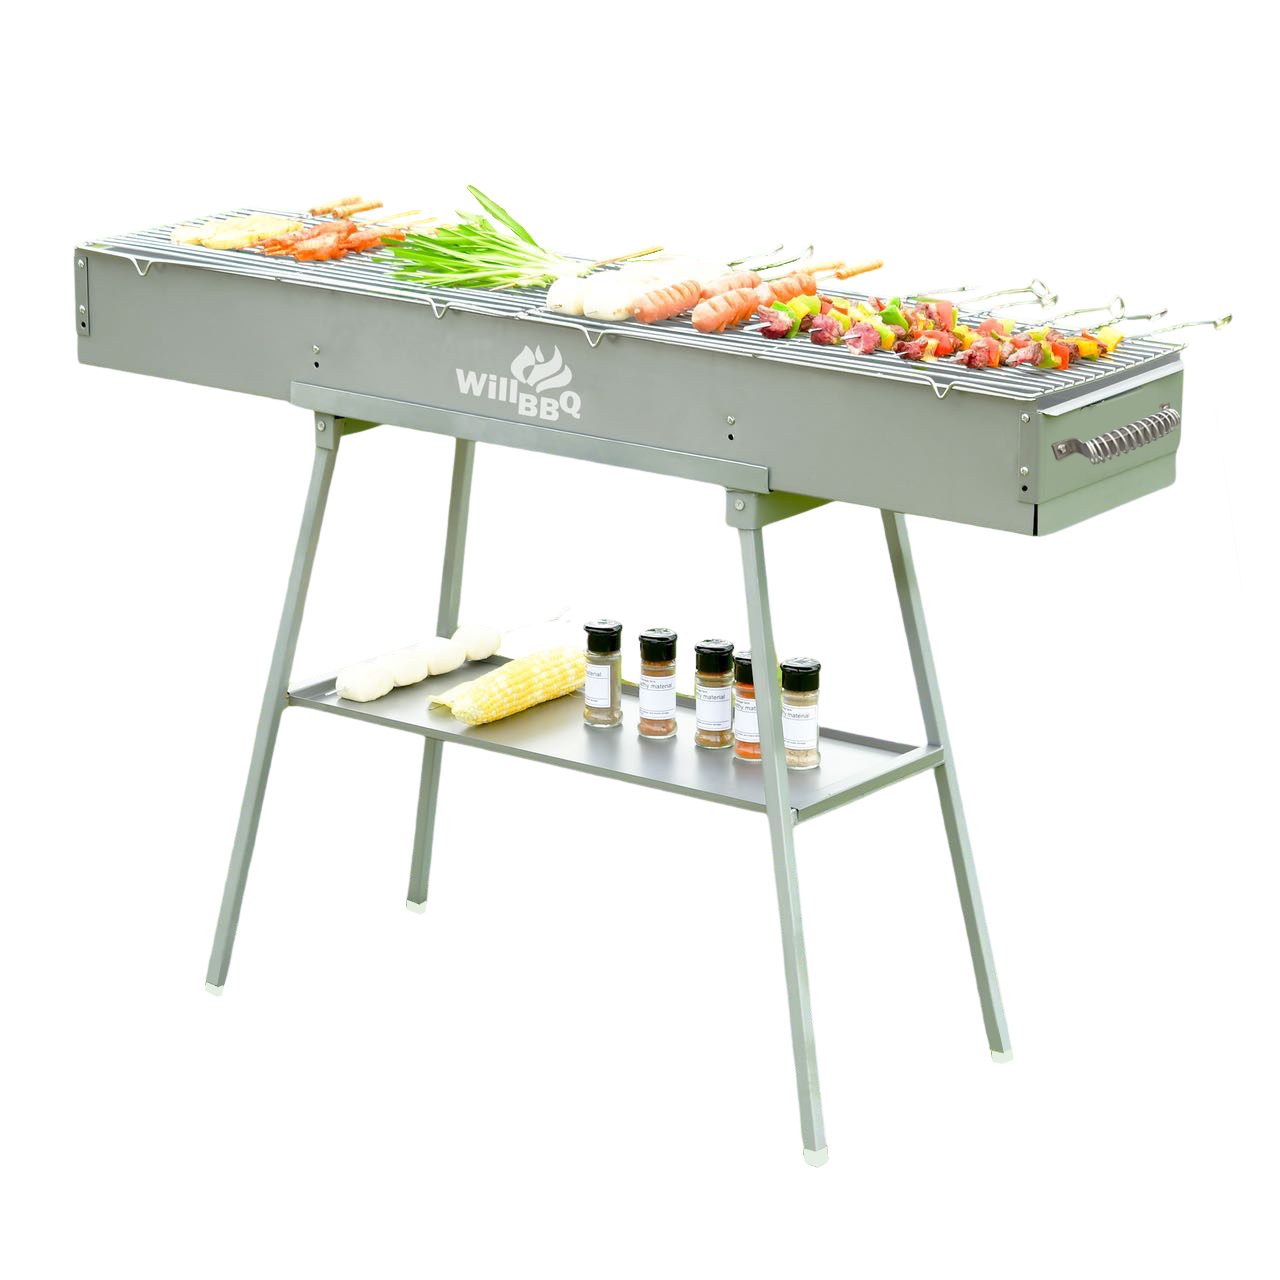 Wide 120cm Commercial Quality Portable Charcoal Hibachi BBQ Camping Barbecue Grill